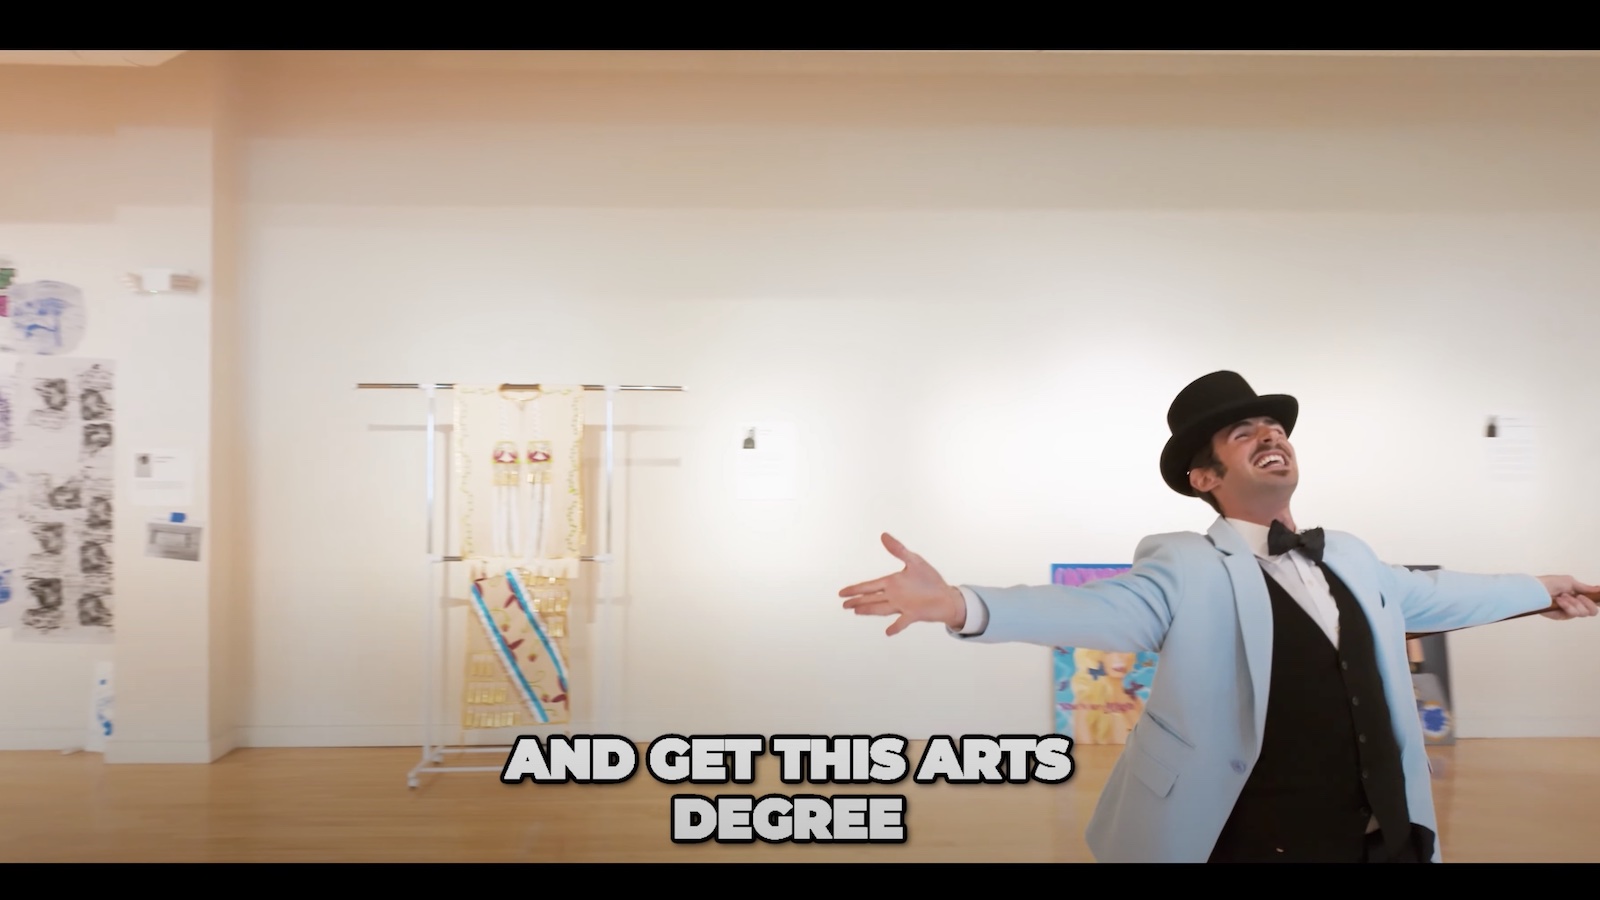 A student in a top hat and blue coat with bowtie dances around in-process art gallery space.